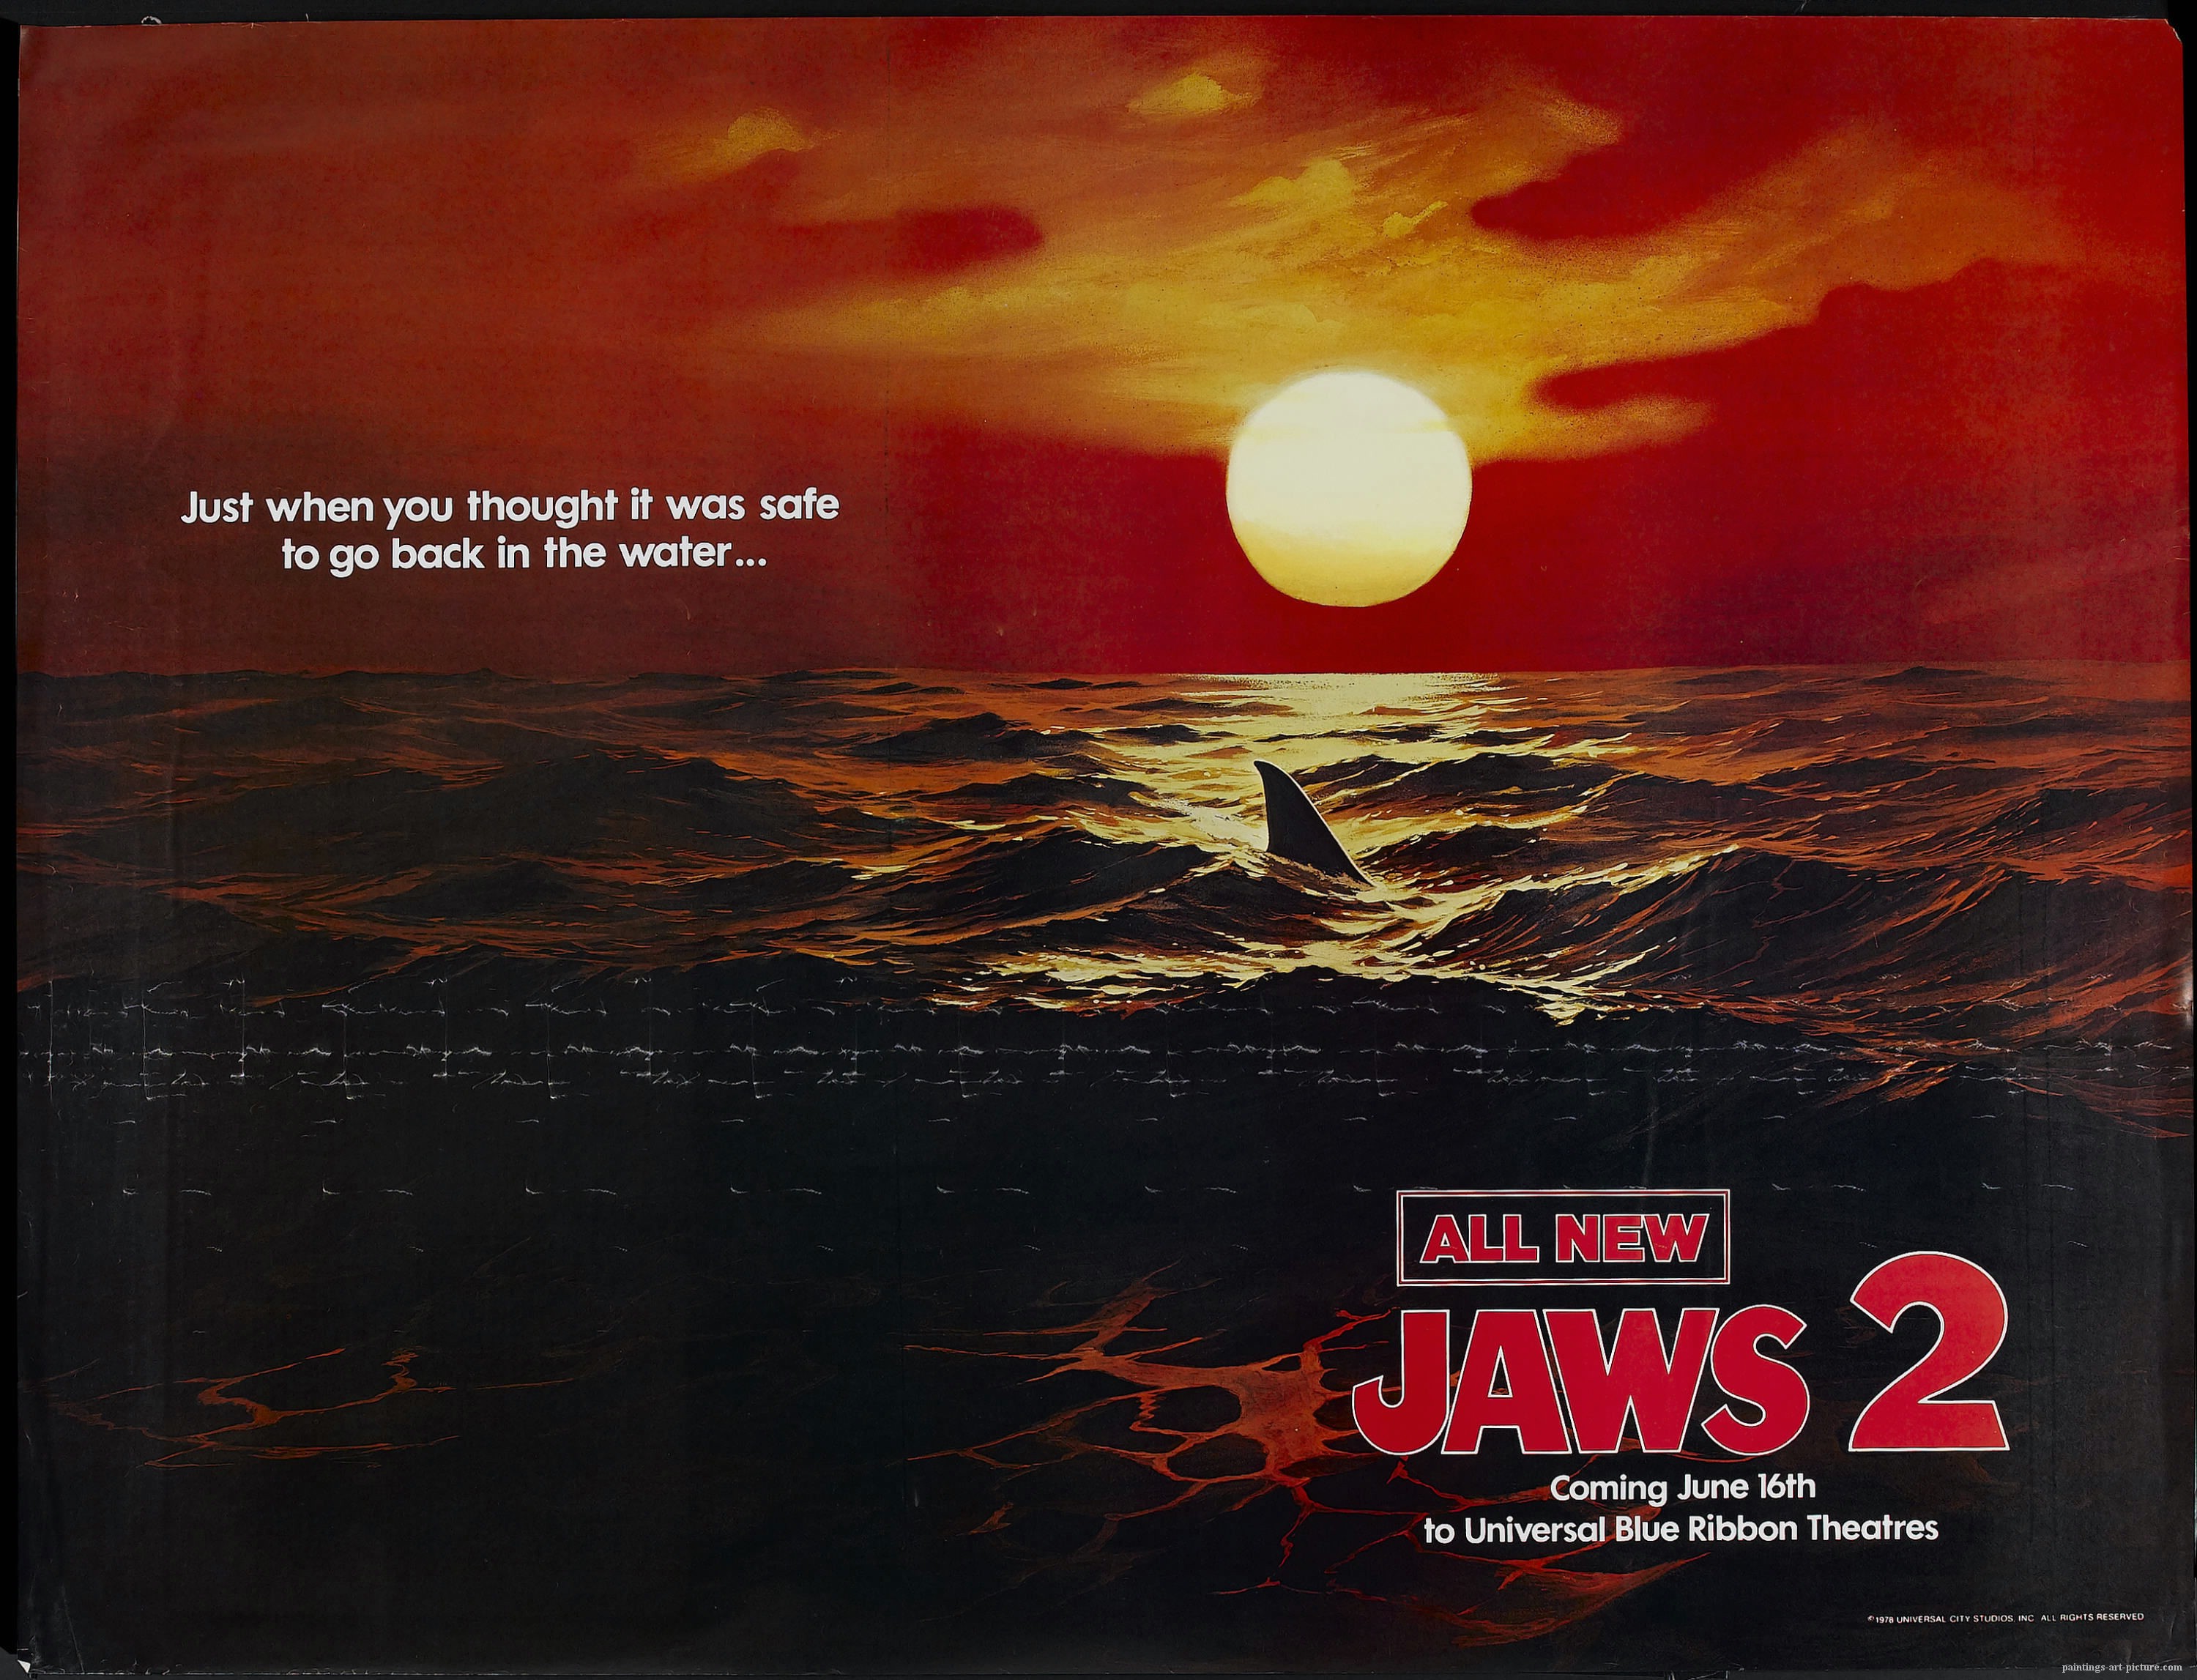 Jaws HD Wallpaper Background